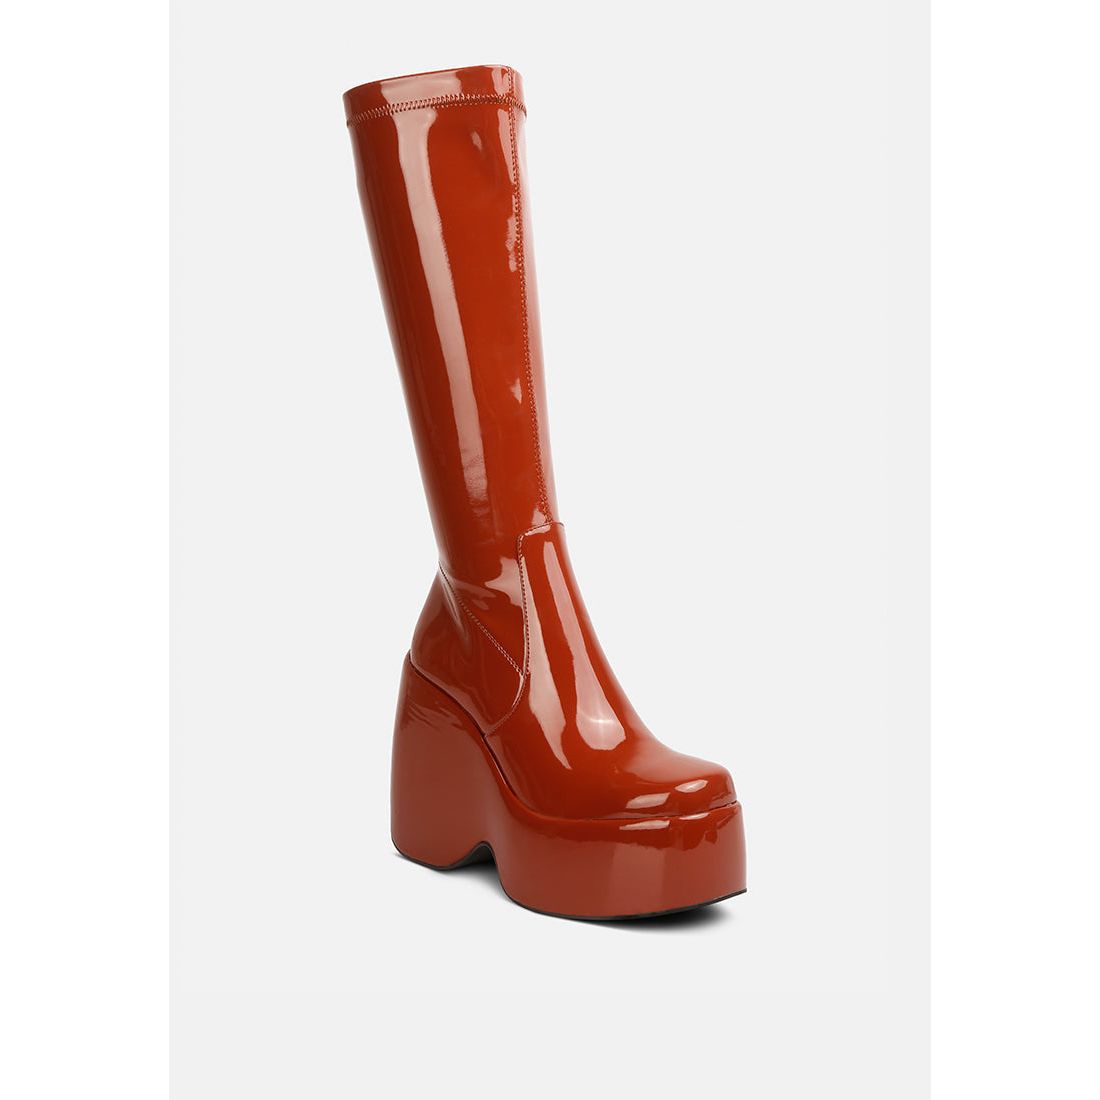 Dirty Dance Patent High Platform Calf Boots - KME means the very best